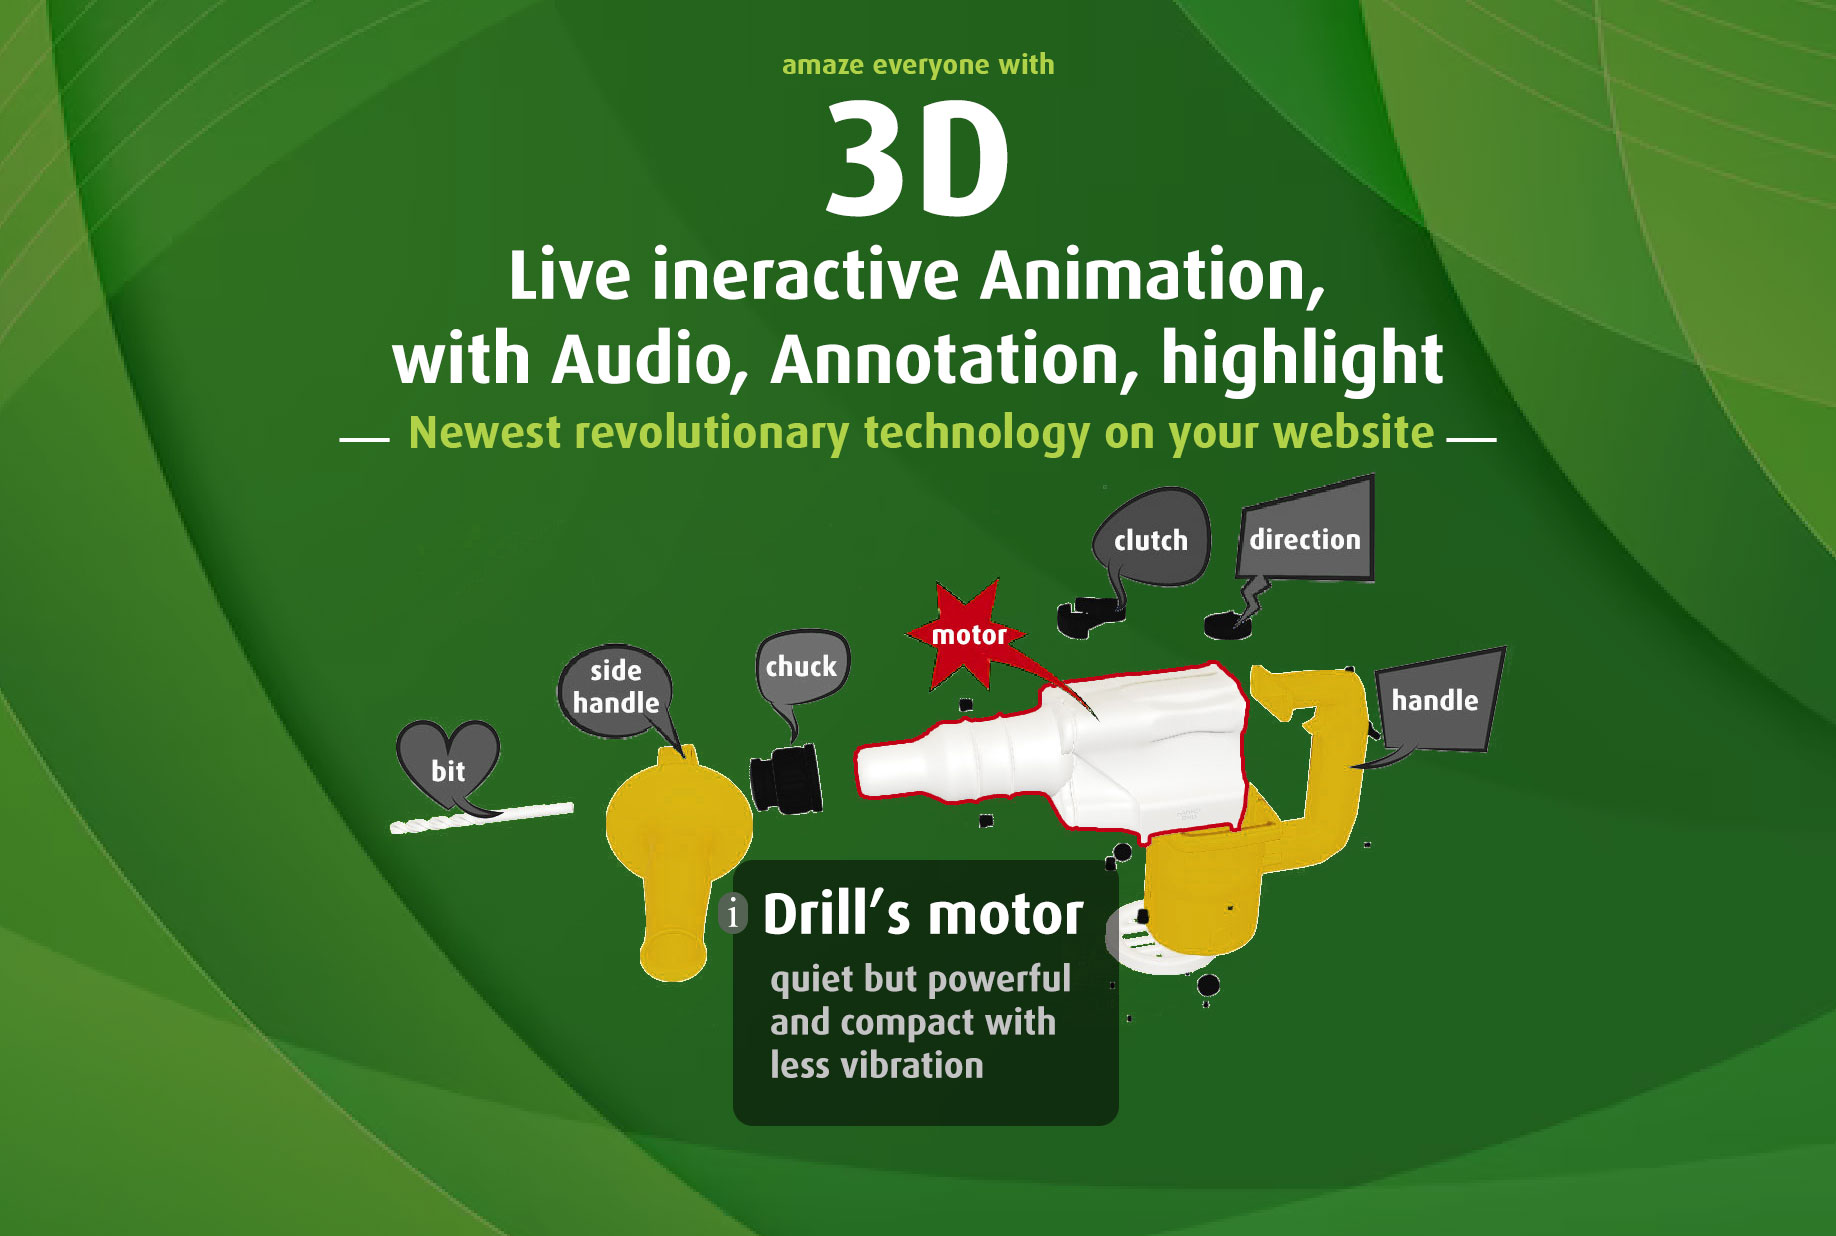 Design-And-Business-3D-audio-annotation-highlight-feature